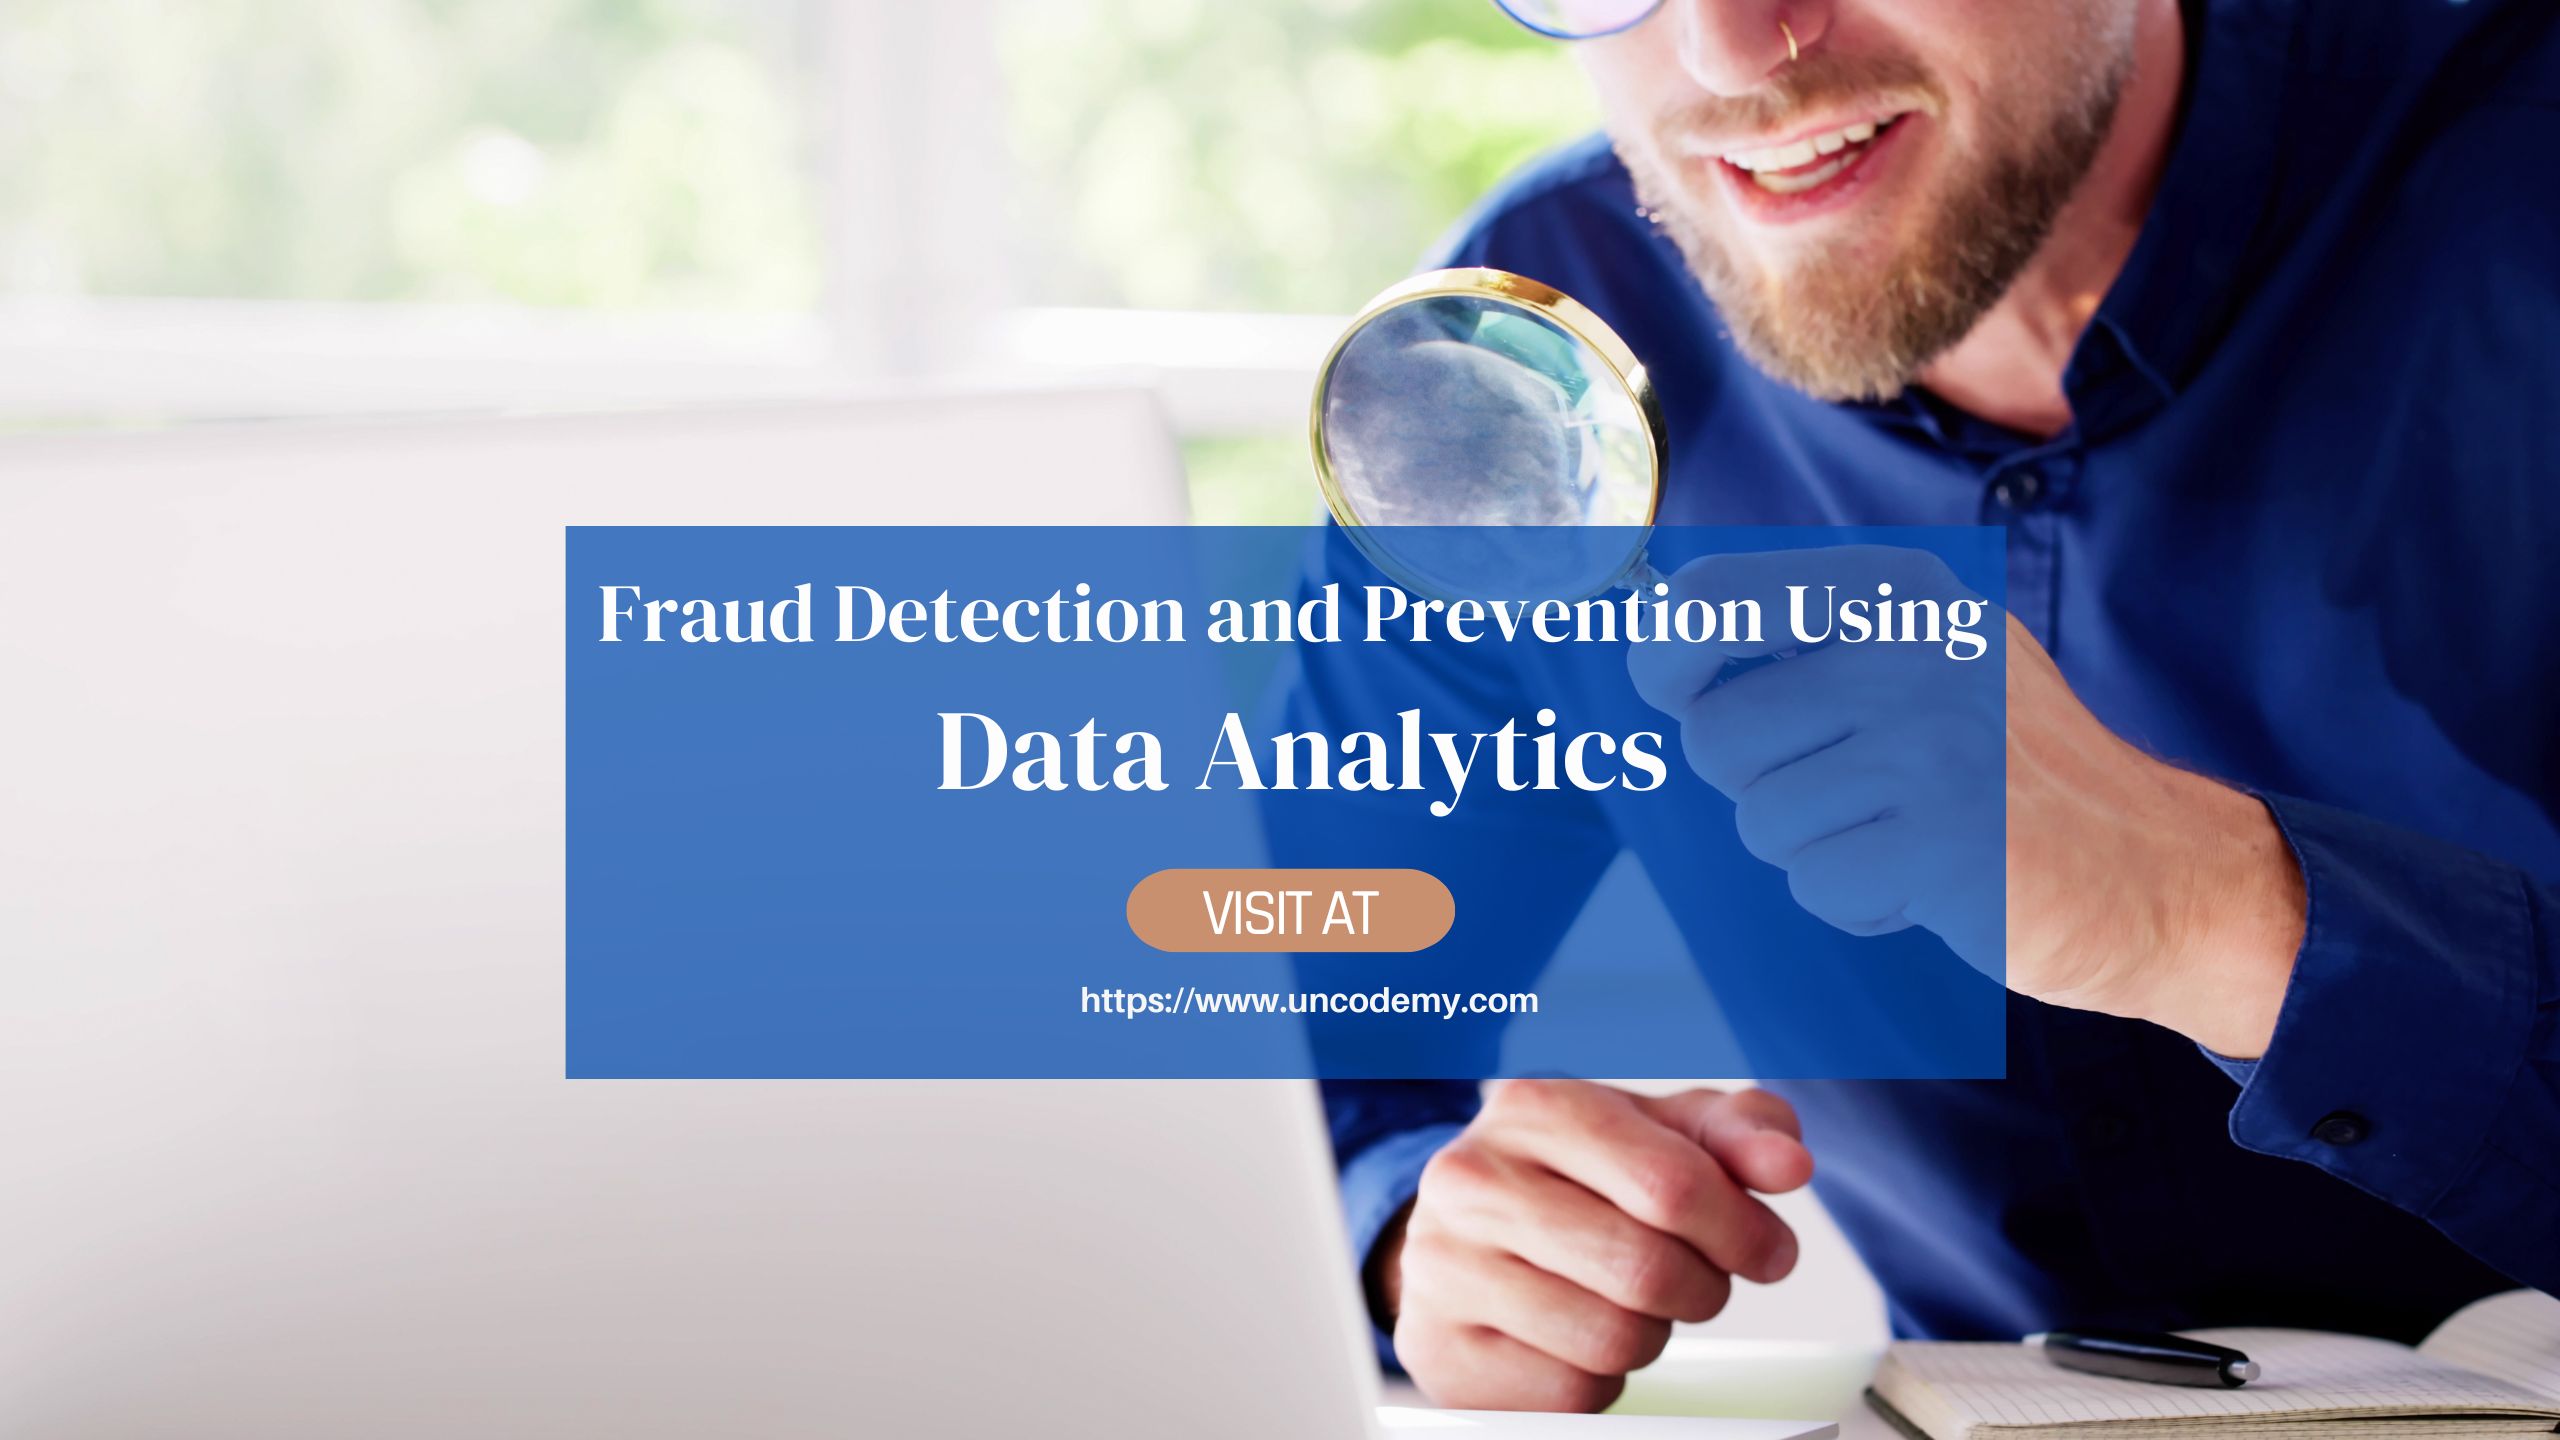 Fraud Detection and Prevention Using Data Analytics